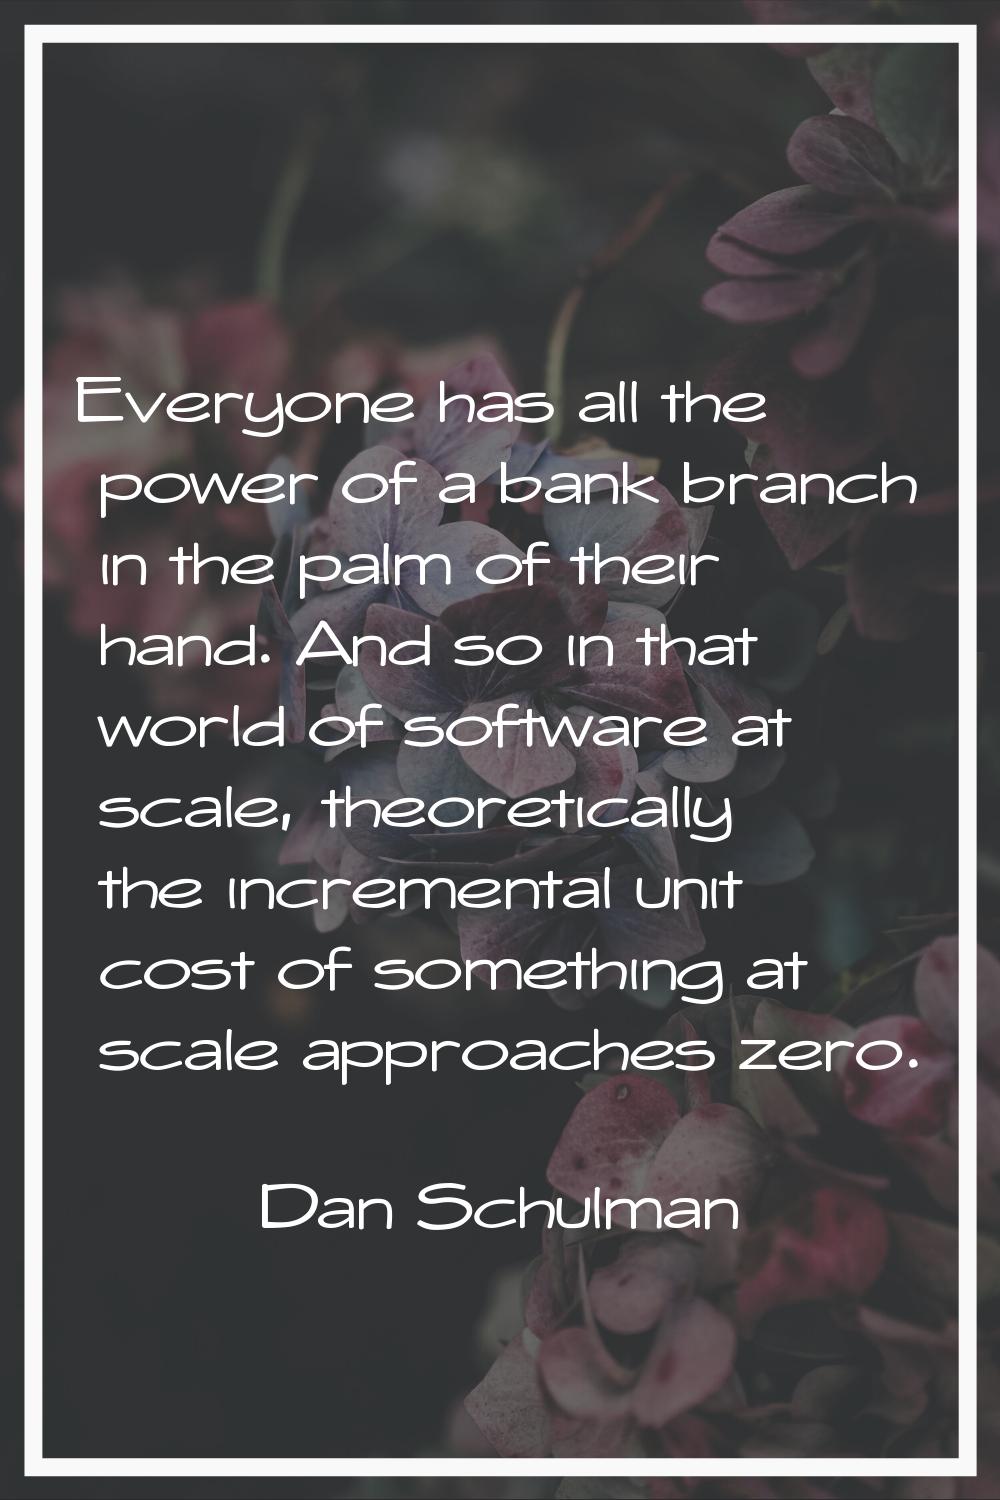 Everyone has all the power of a bank branch in the palm of their hand. And so in that world of soft